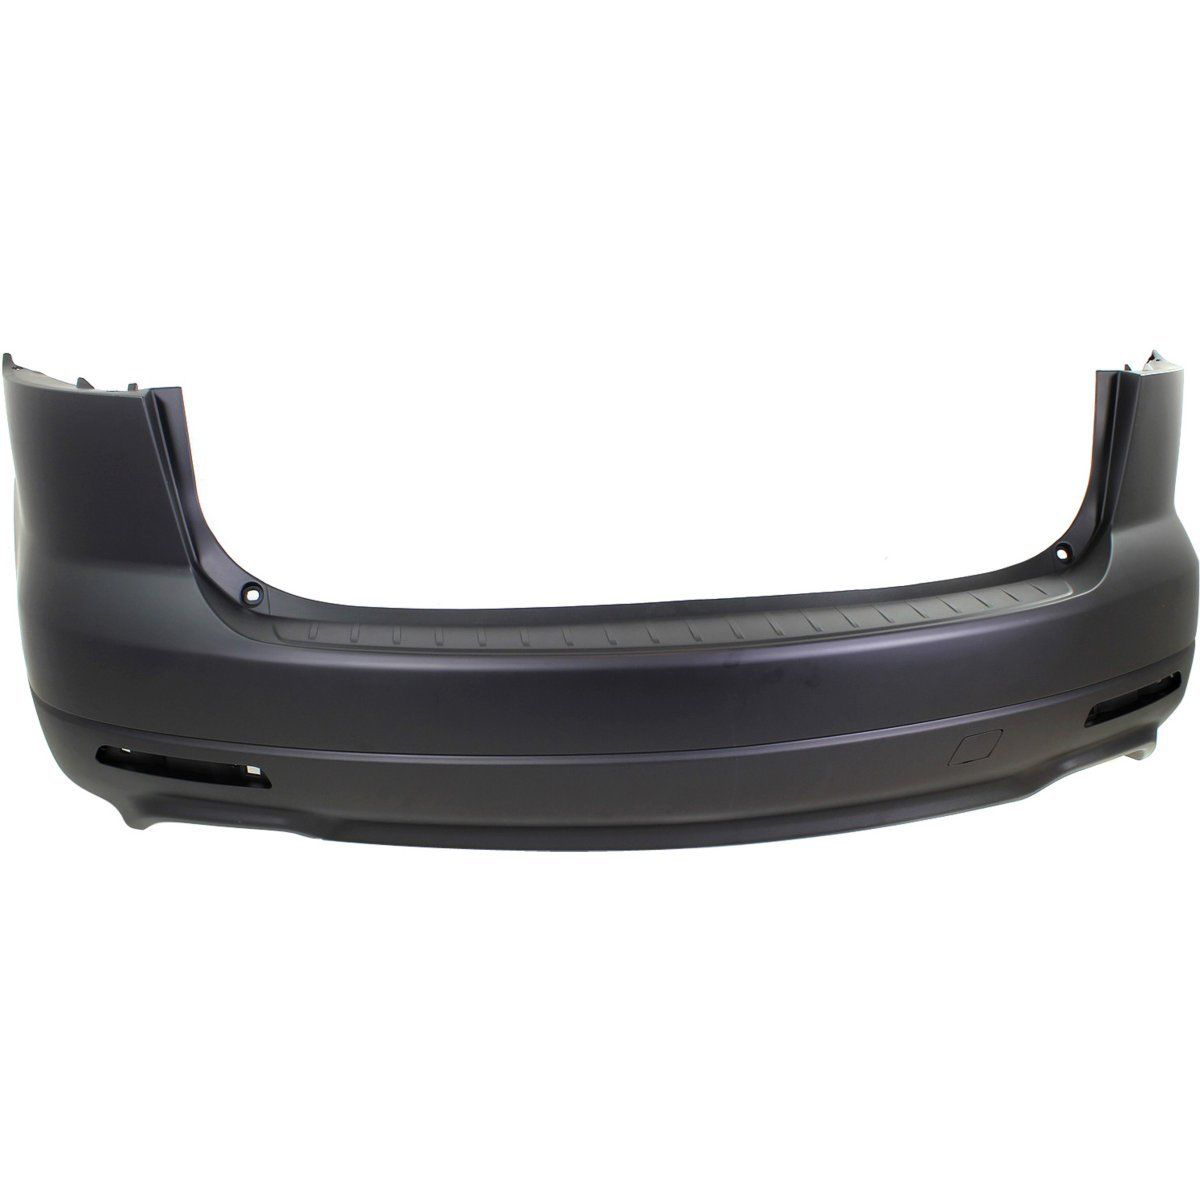 2007-2012 MAZDA CX9 Rear Bumper Cover Painted to Match